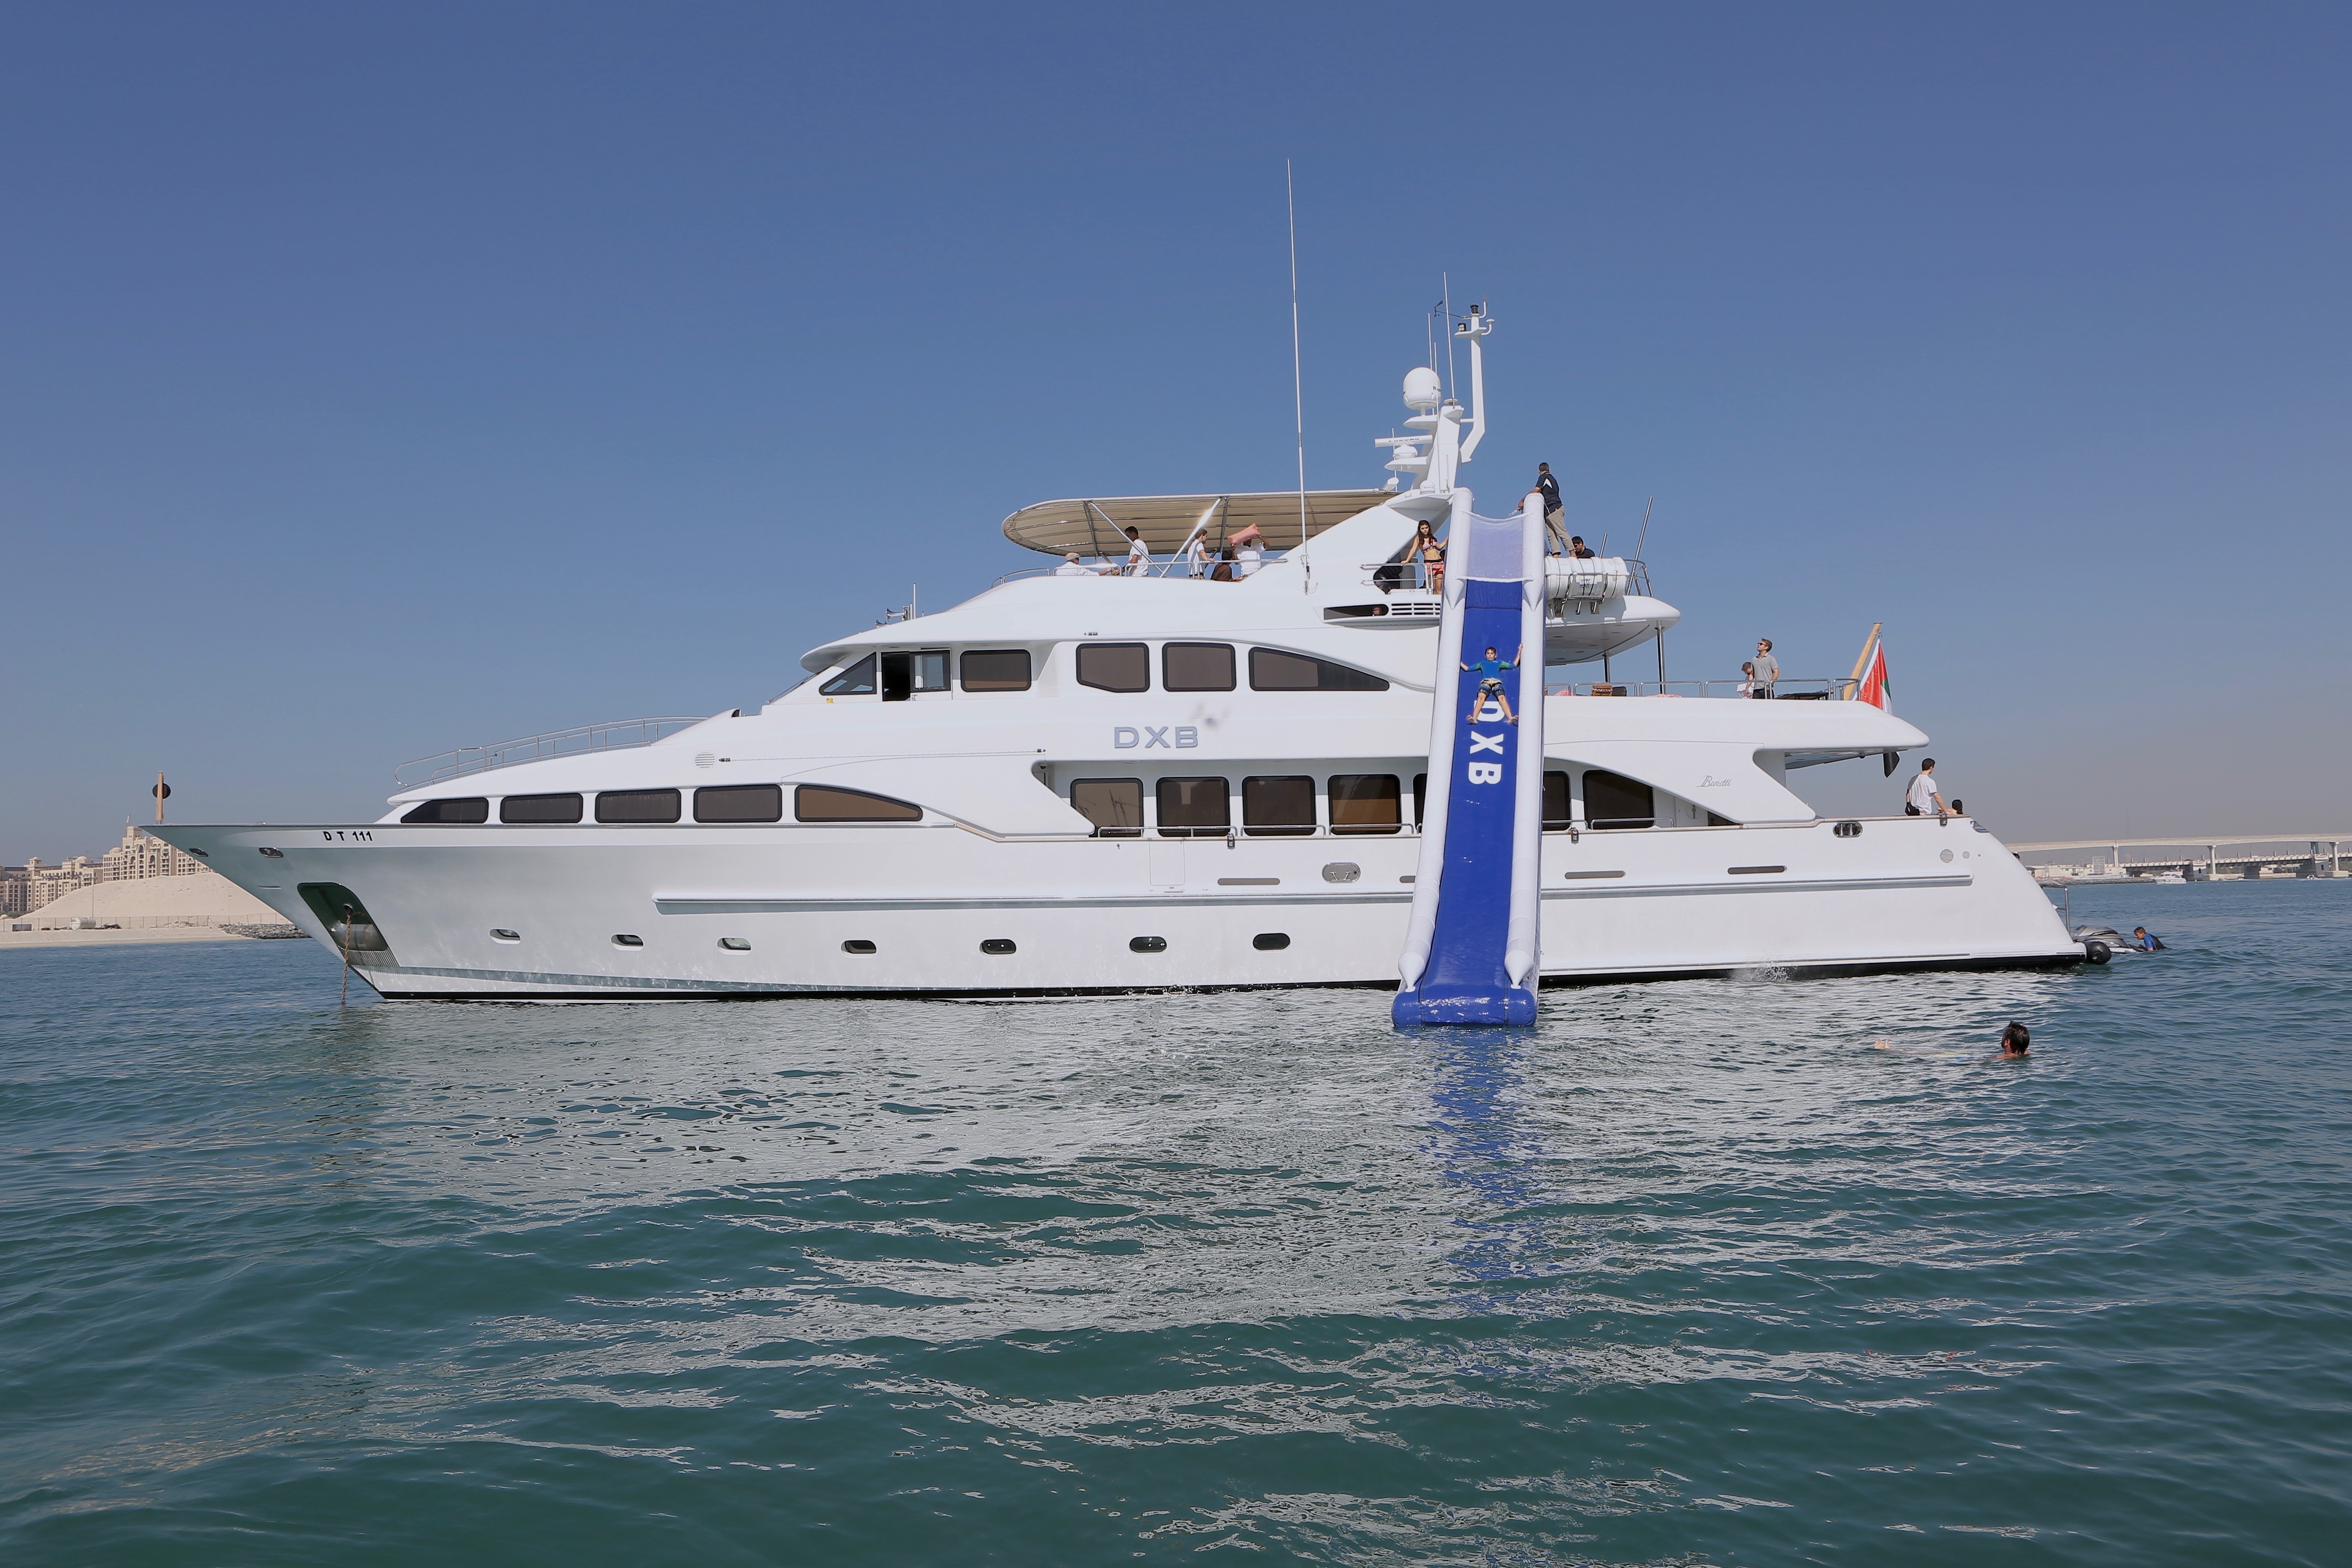 The 35m Yacht DXB